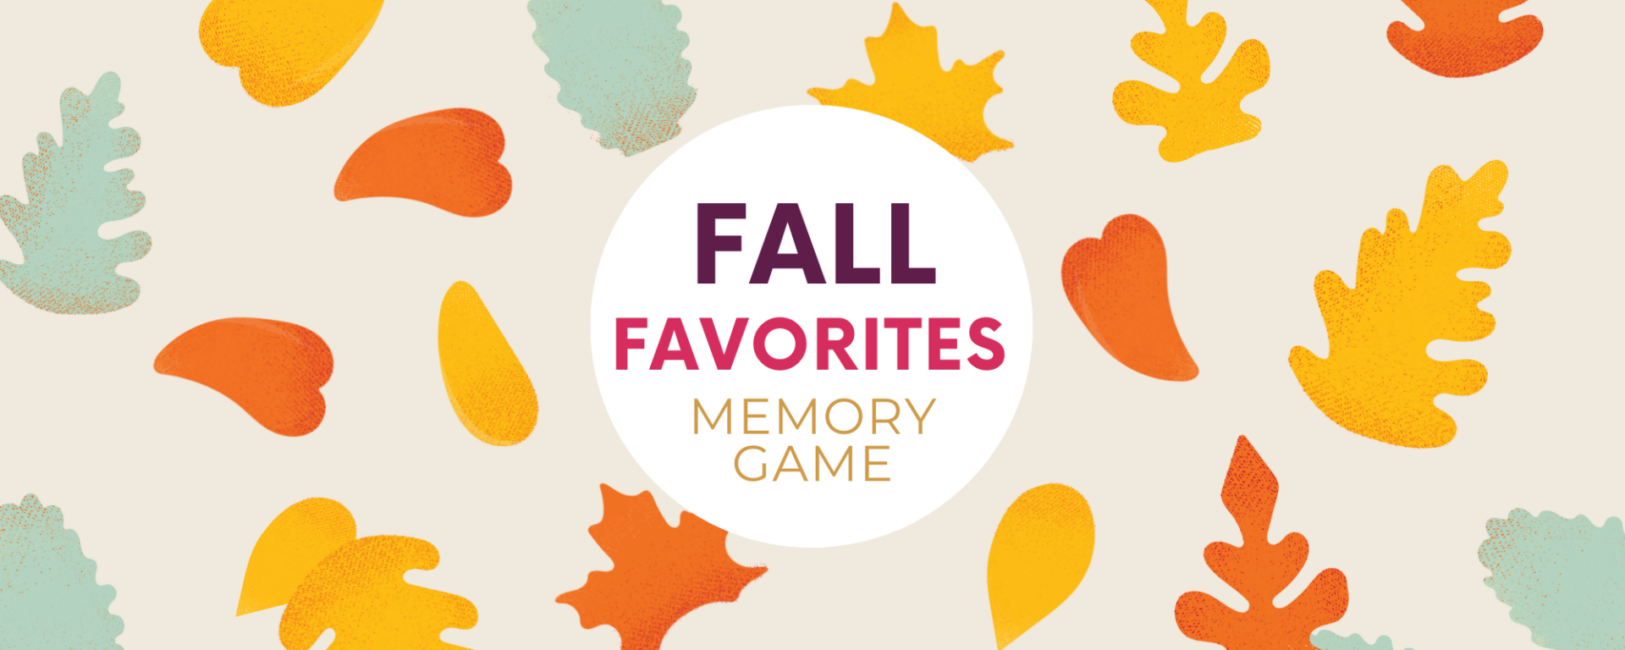 Fall Favorites Memory Game Graphic with Leaves